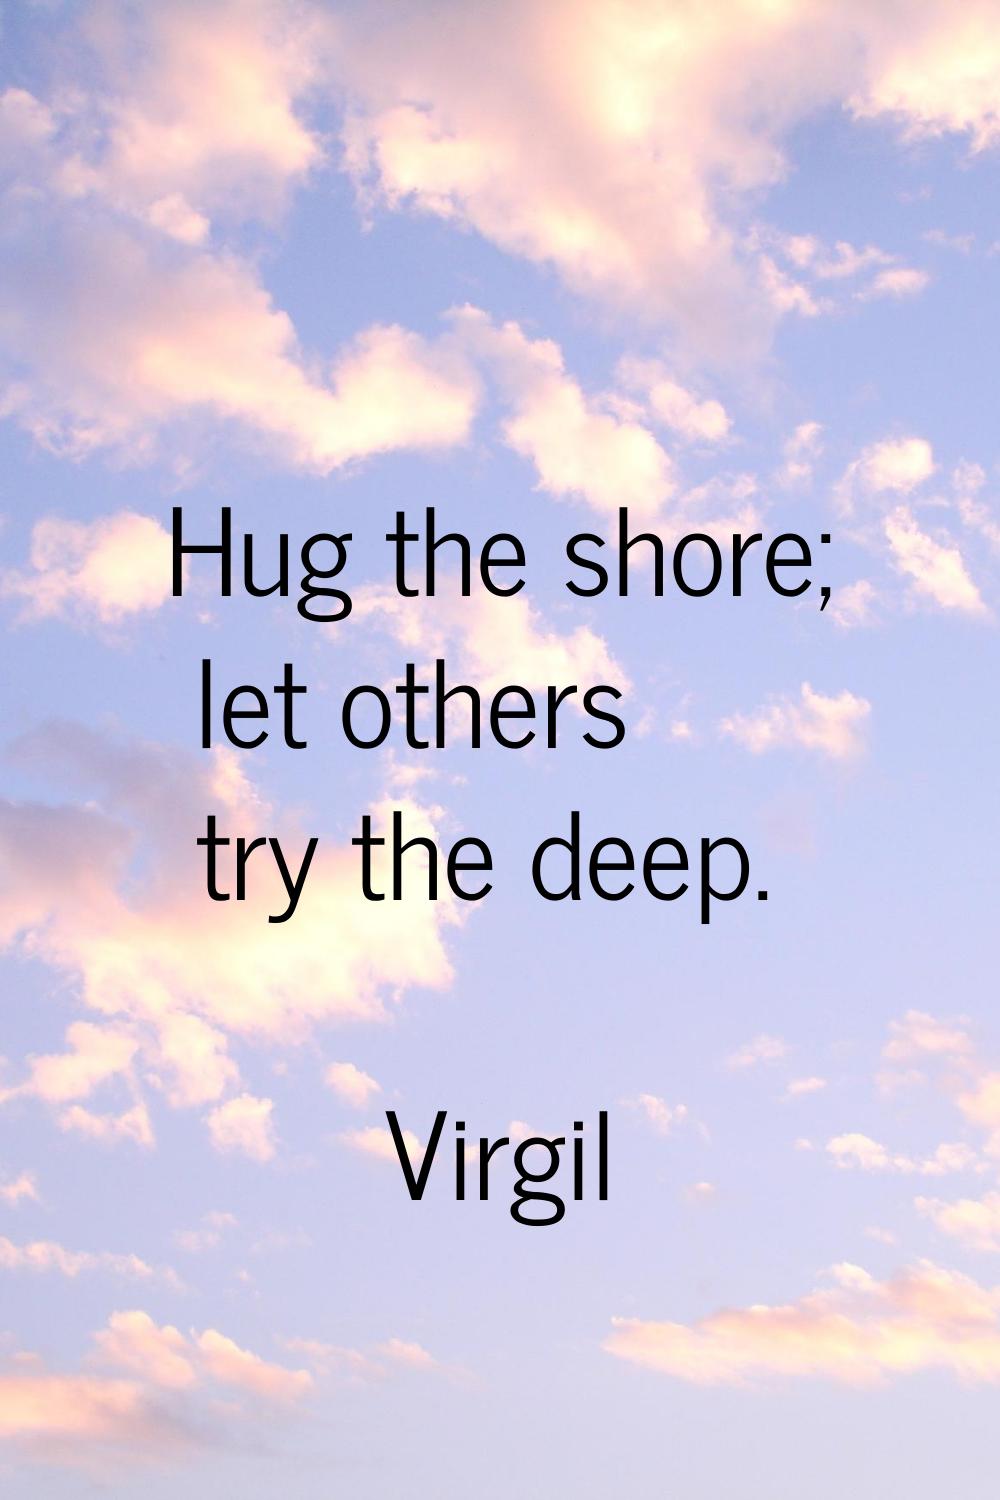 Hug the shore; let others try the deep.